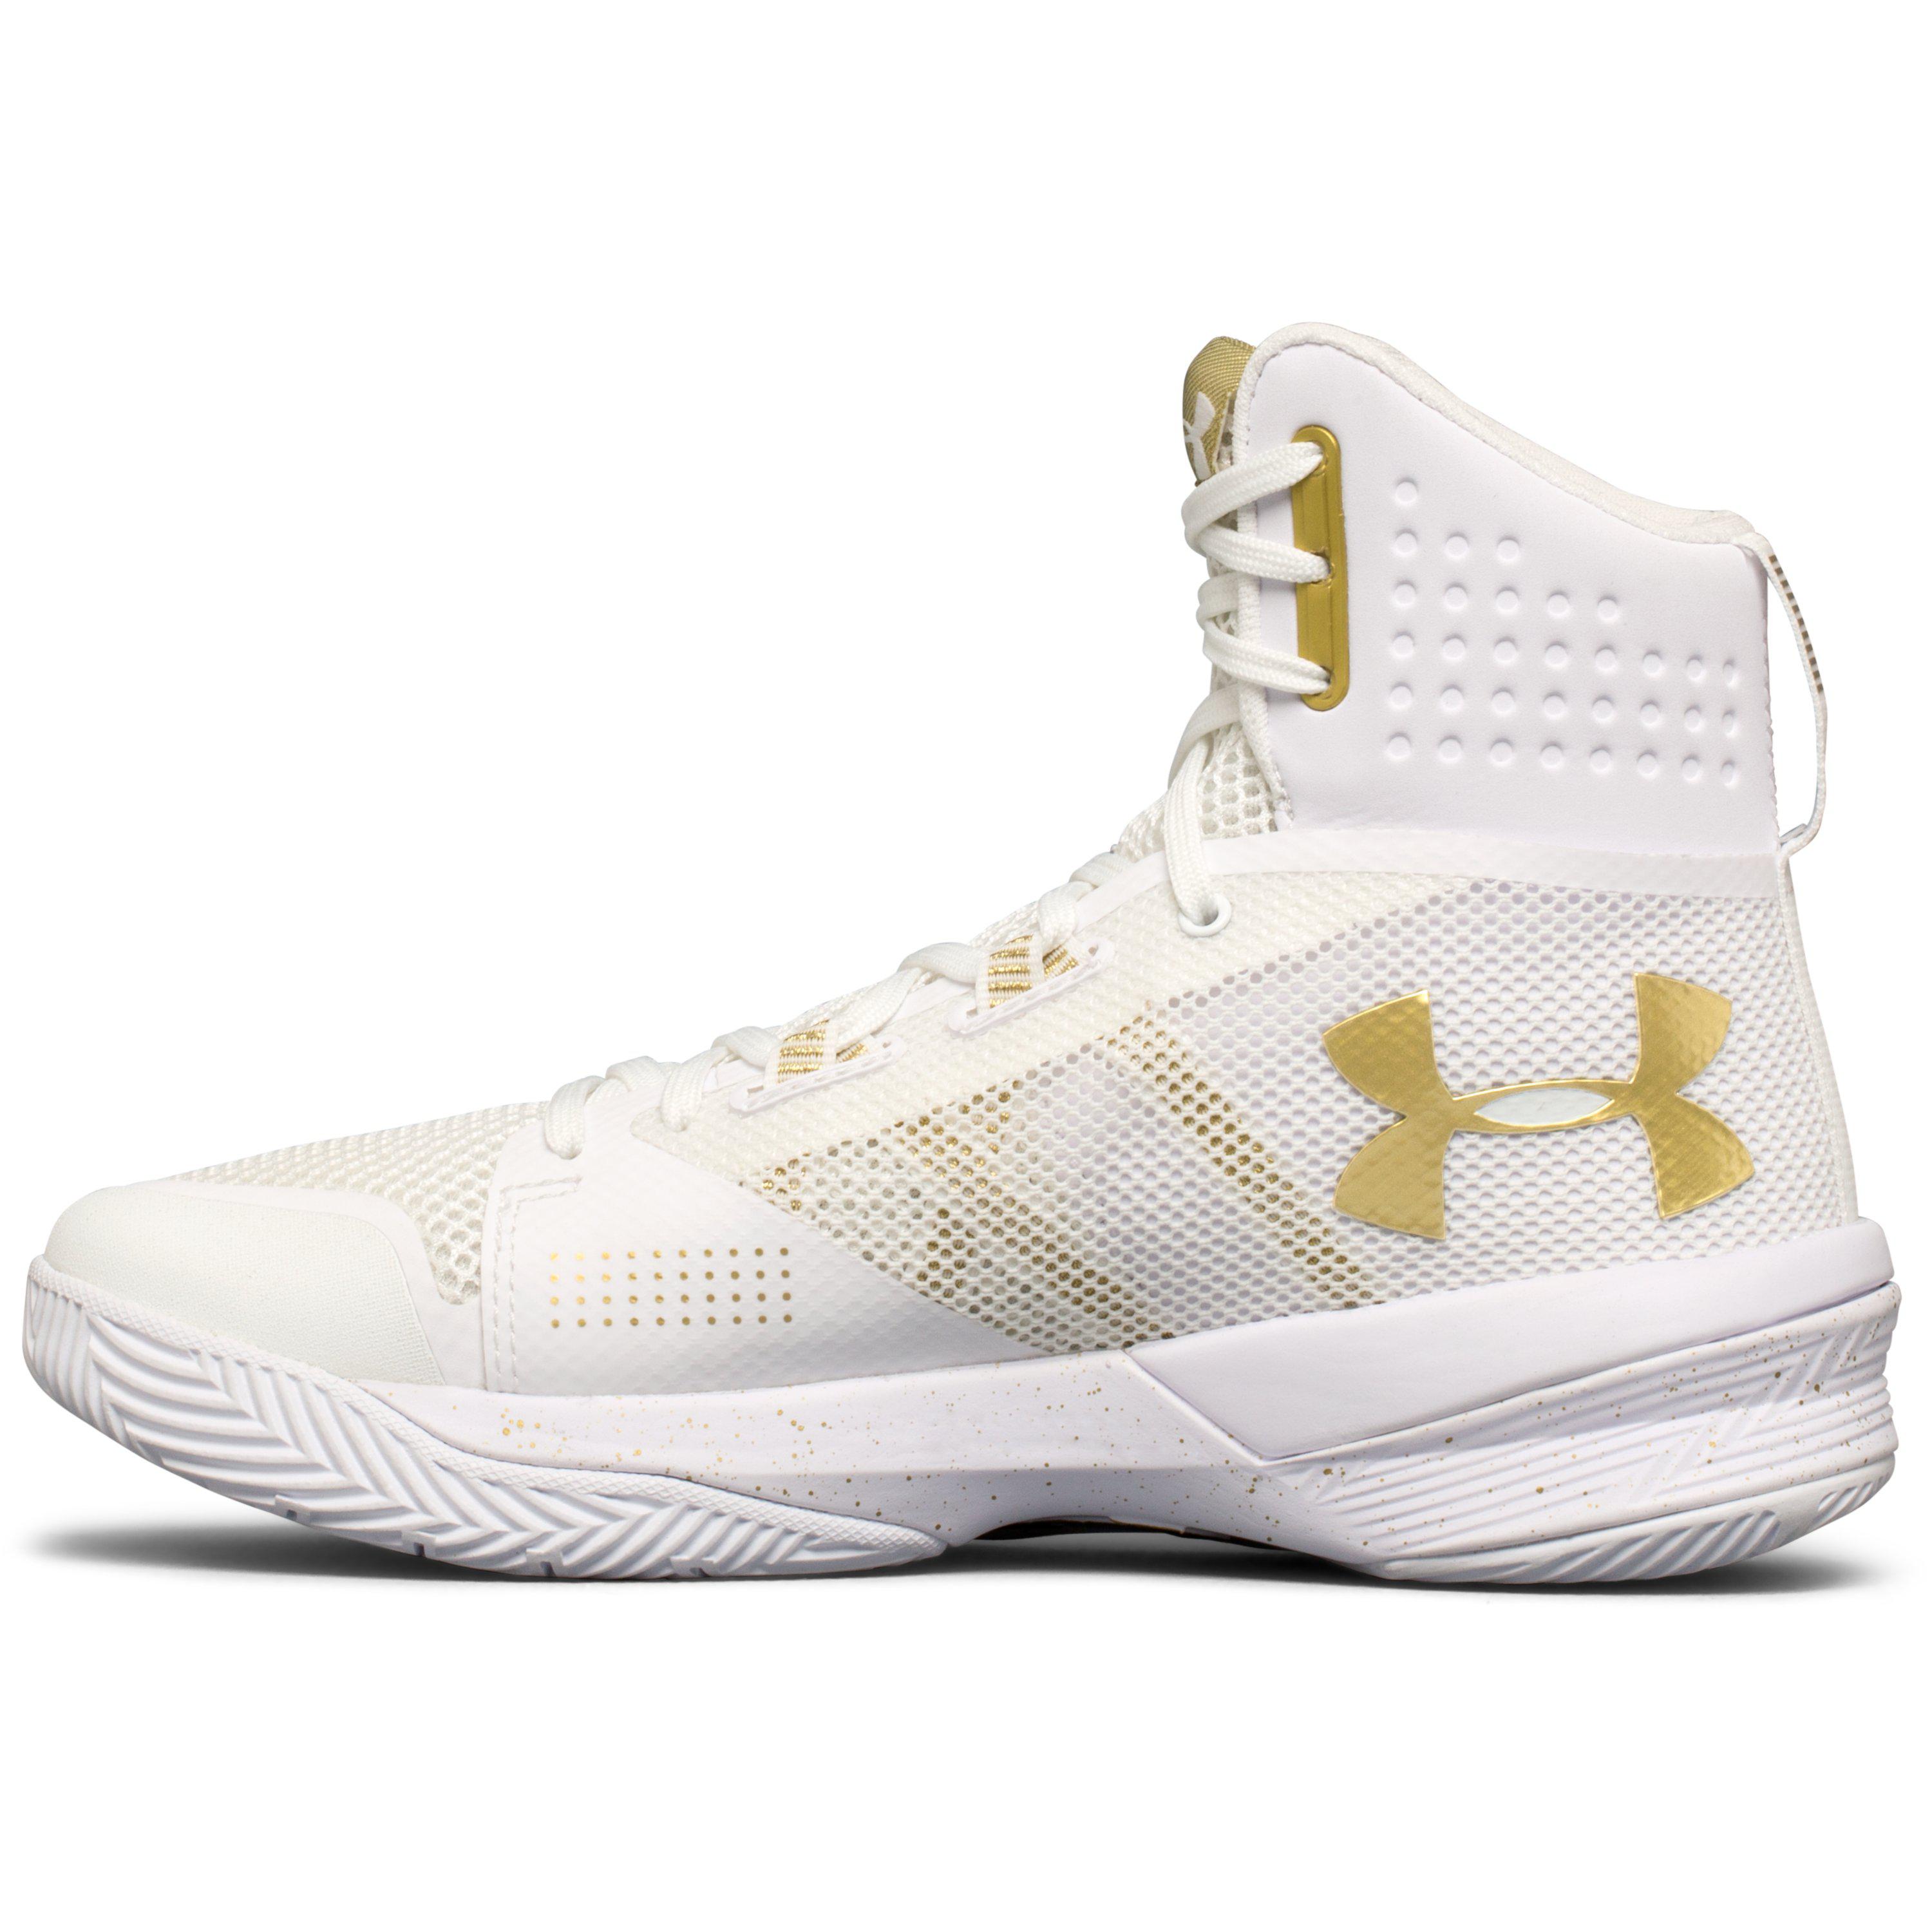 Under Armour Women's Ua Highlight Ace Volleyball Shoes in White ...